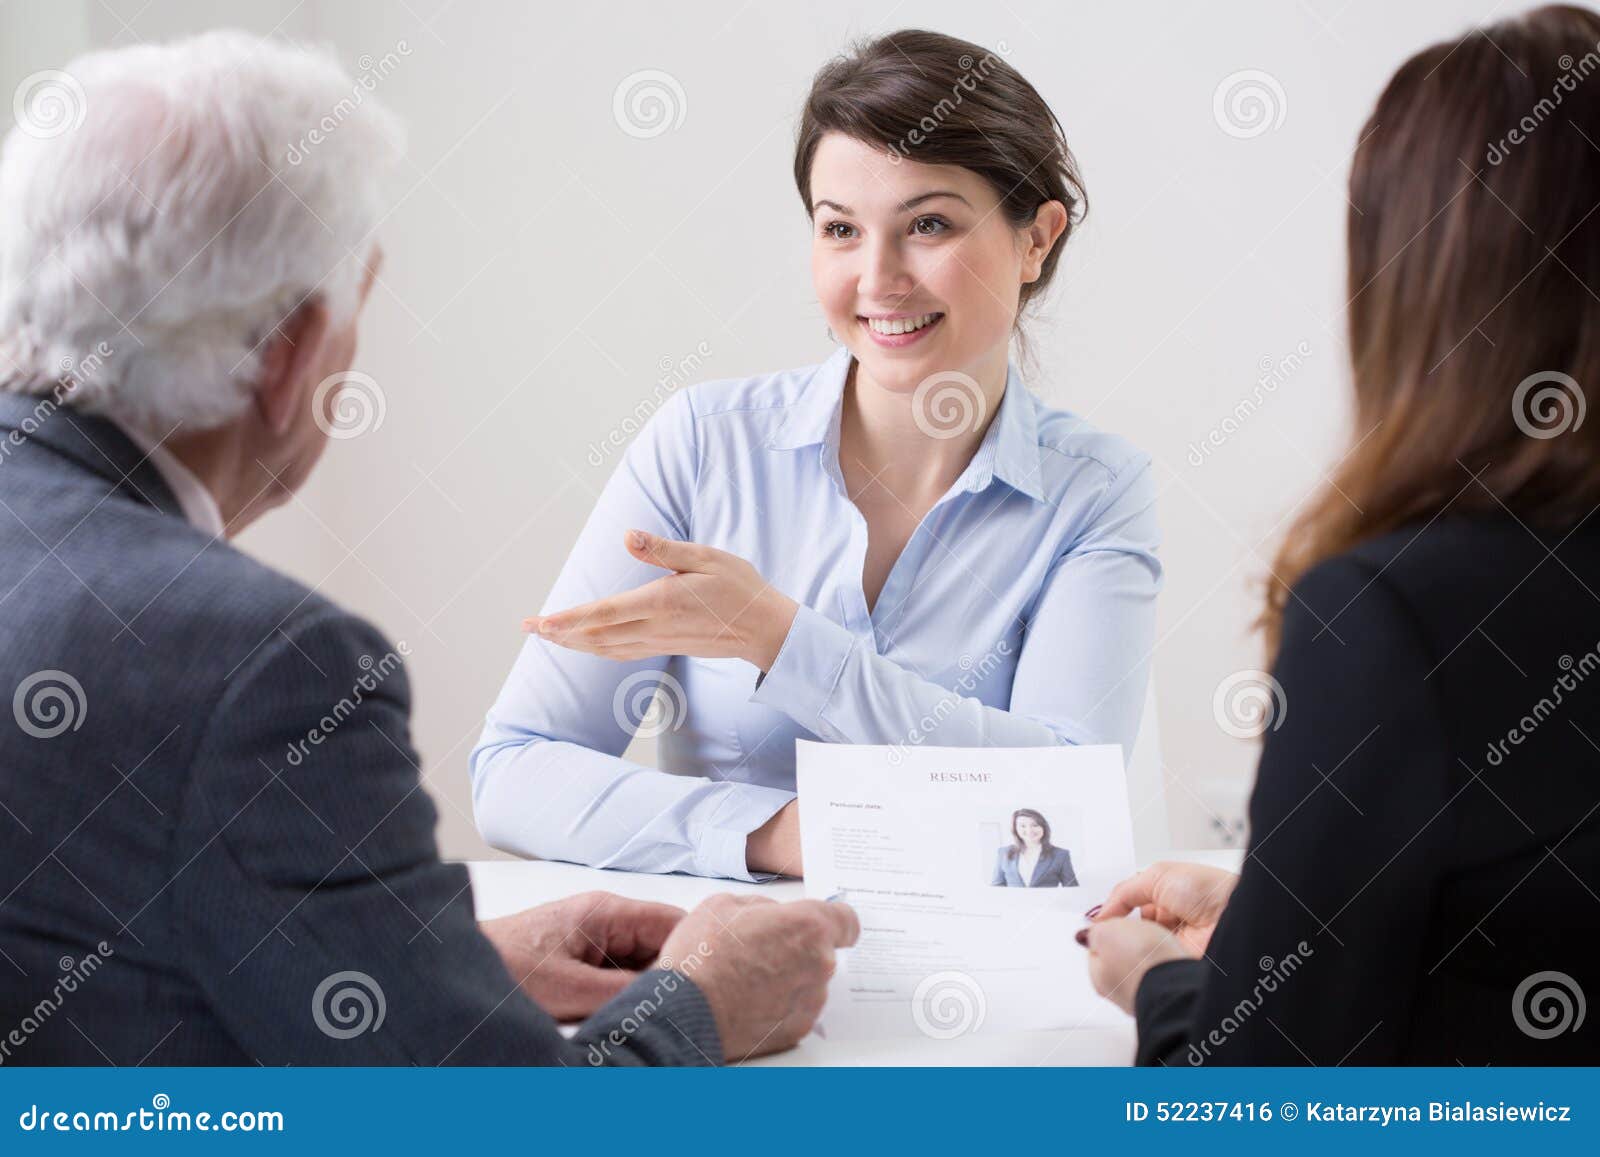 human resources team during job interview